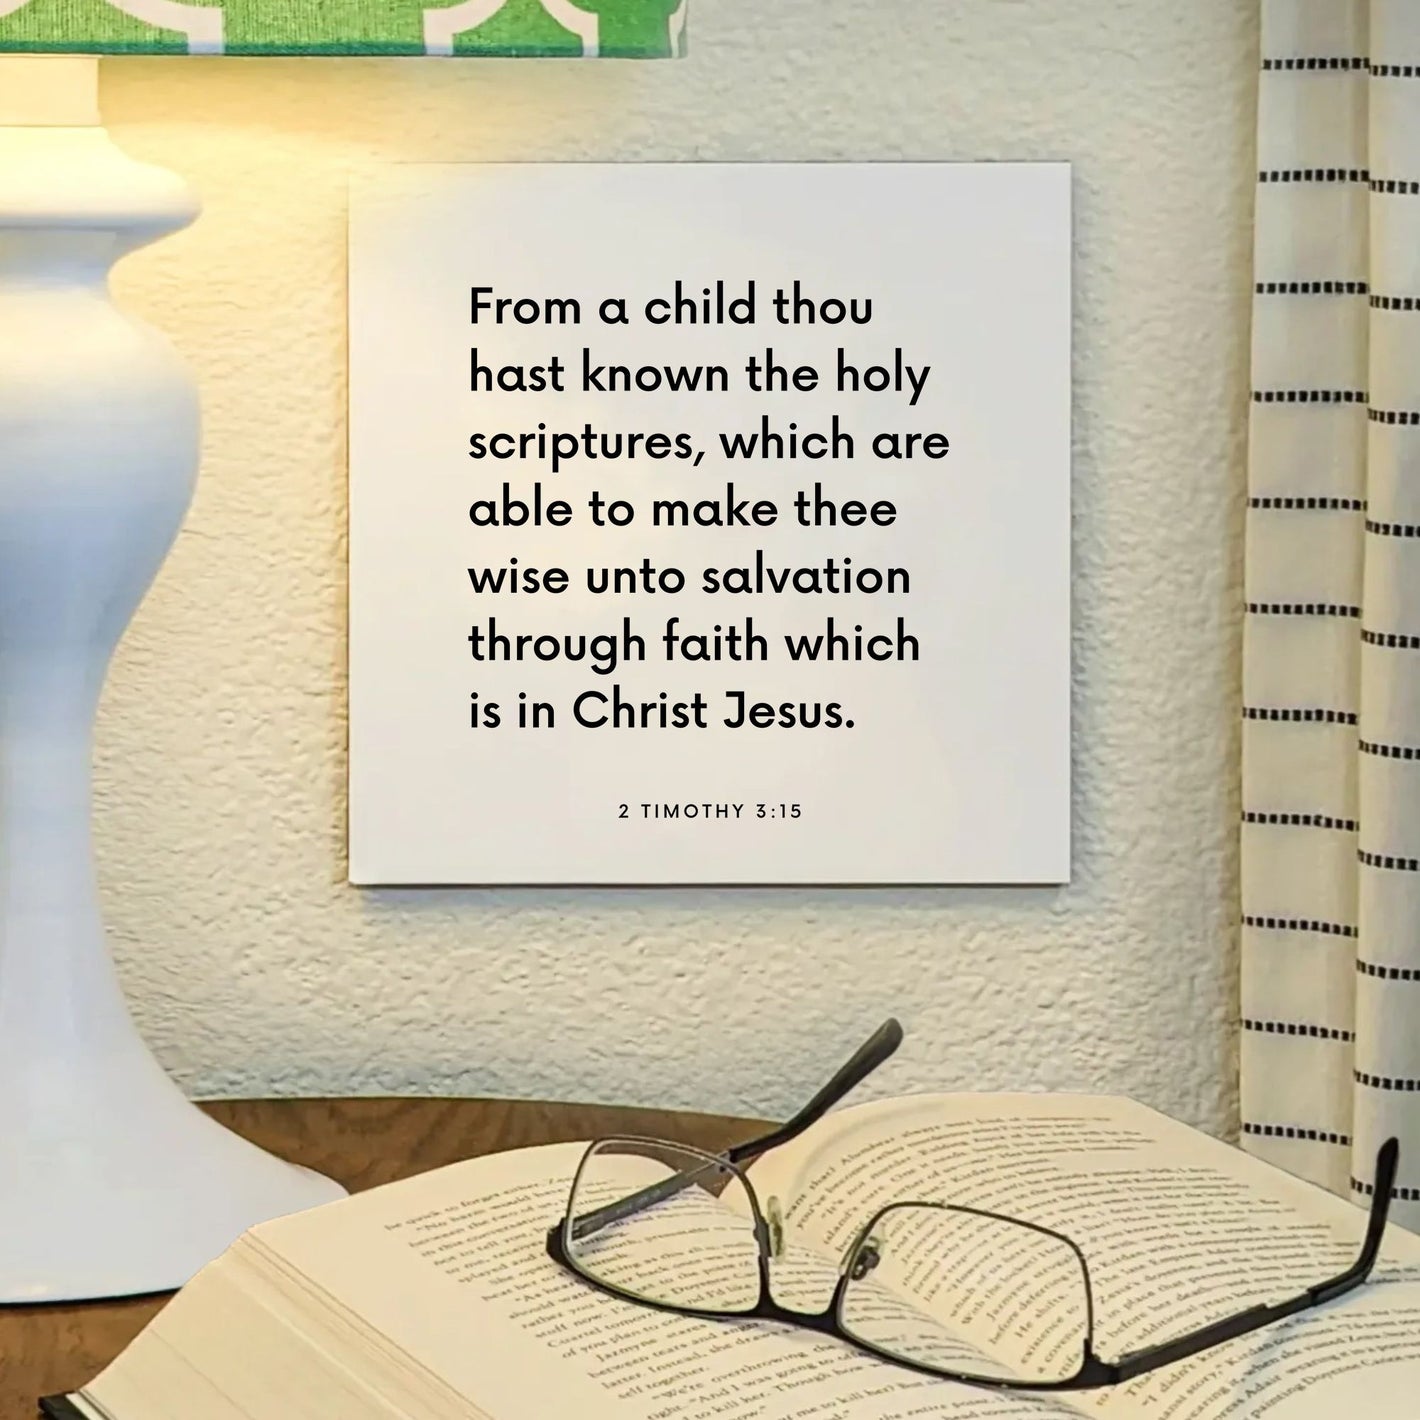 Lamp mouting of the scripture tile for 2 Timothy 3:15  - "From a child thou hast known the holy scriptures"